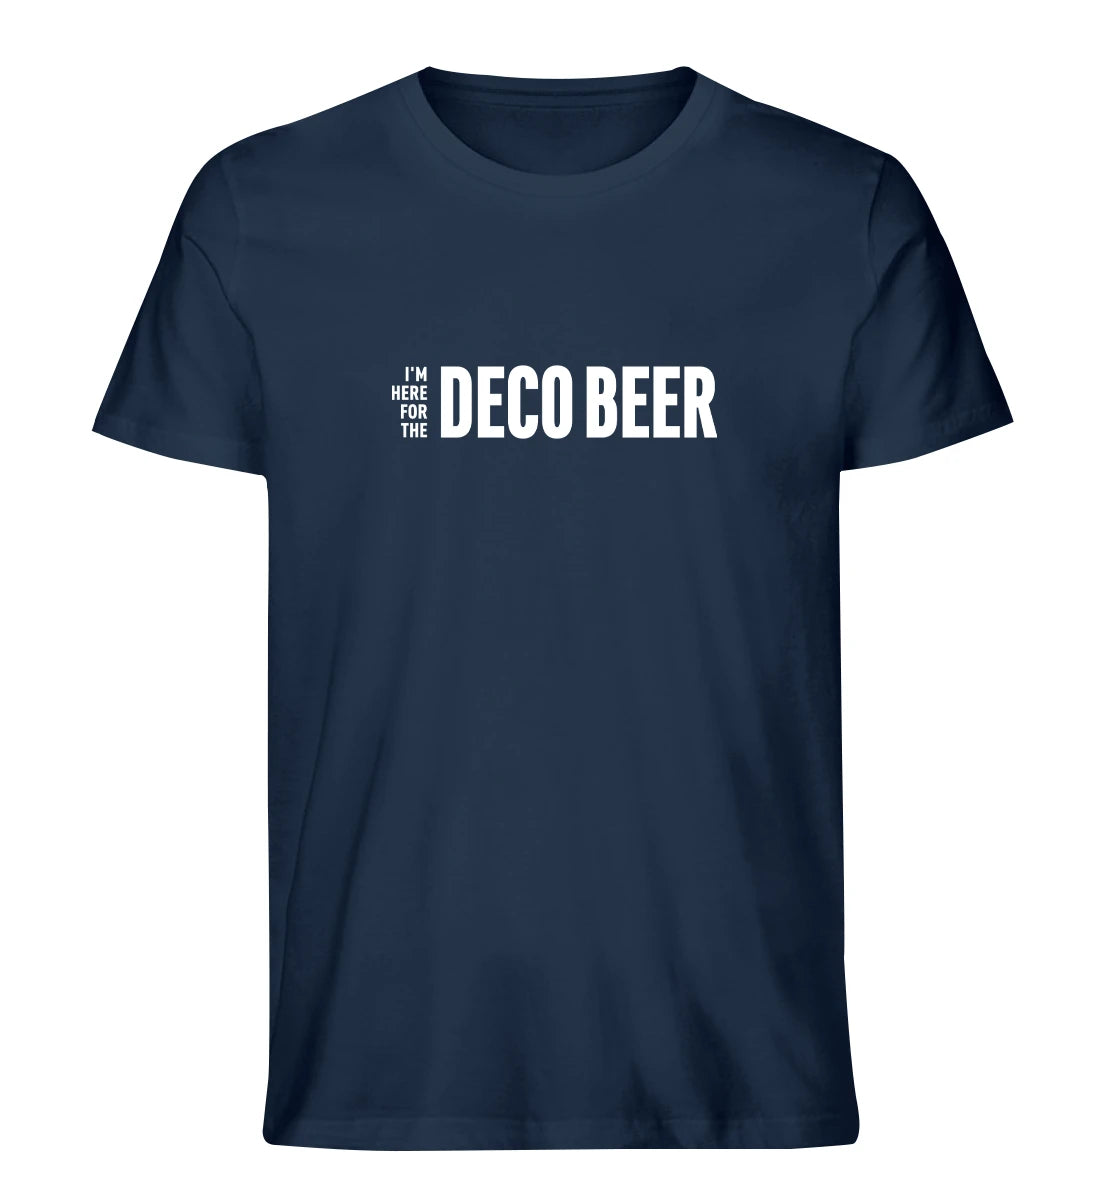 I'm here for the Deco Beer - 100 % Bio T-Shirt